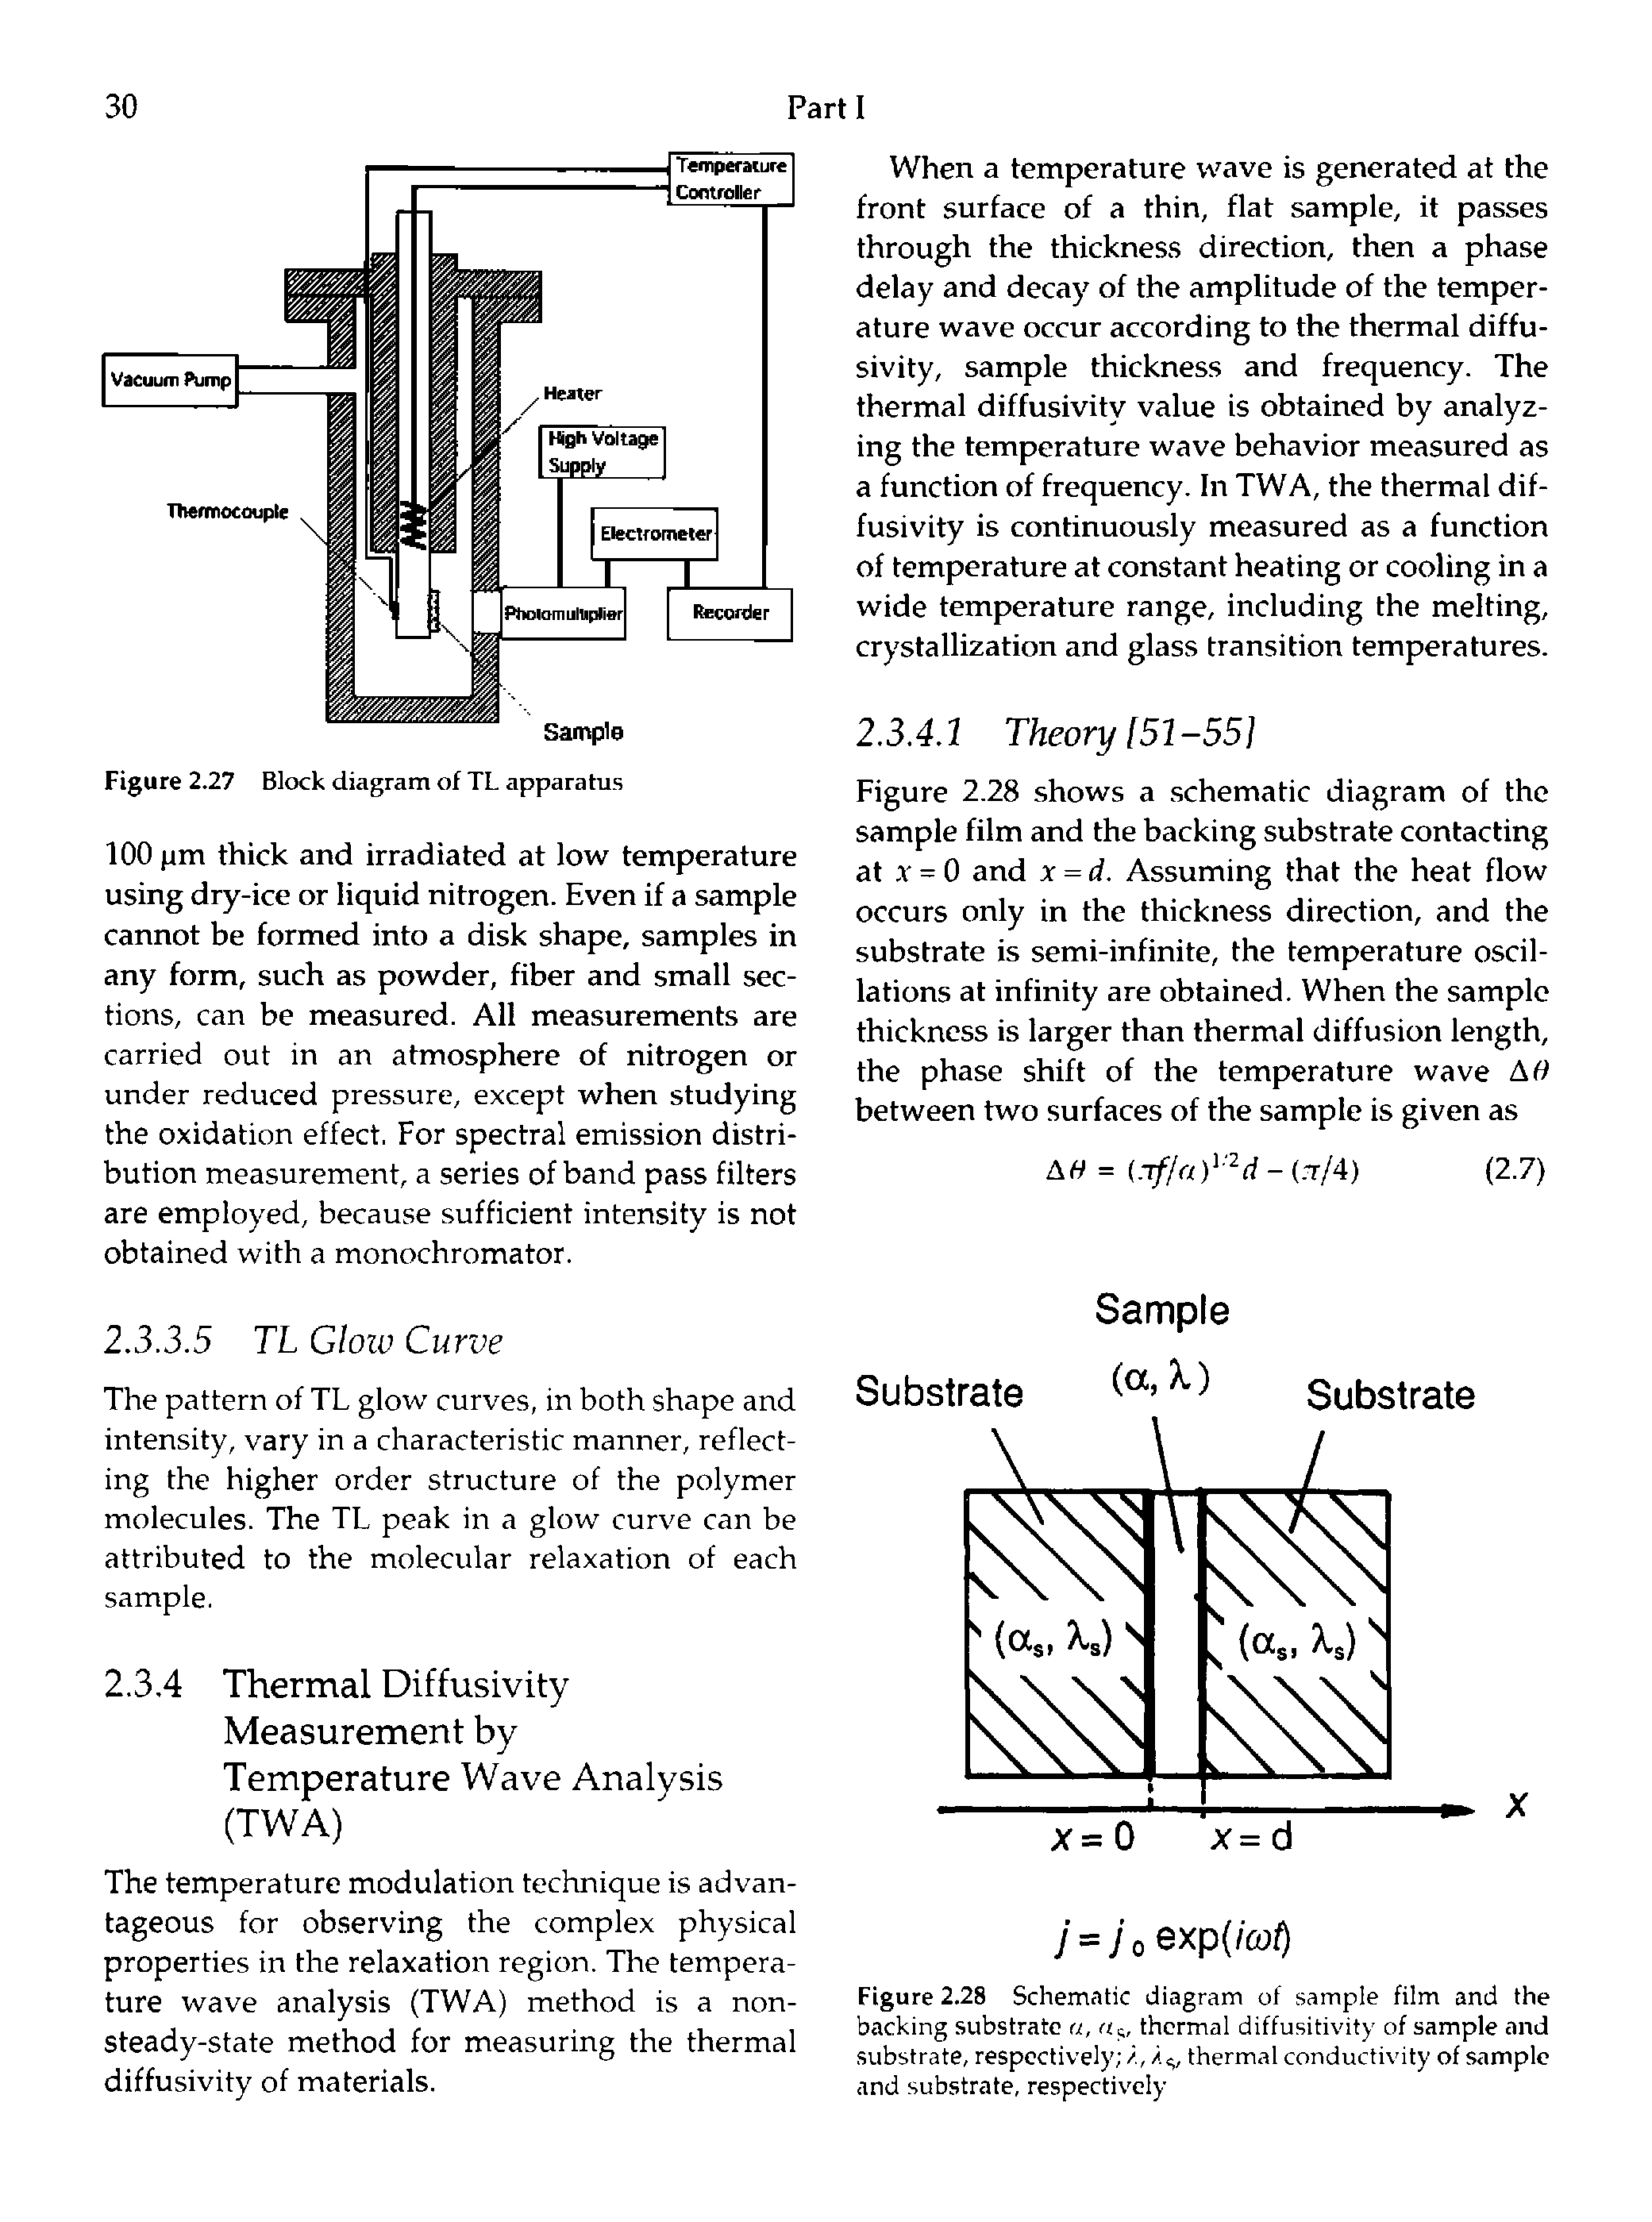 Figure 2.28 Schematic diagram of sample film and the backing substrate a, thermal diffusitivity of sample and substrate, respectively /,/ , thermal conductivity of sample and substrate, respectively...